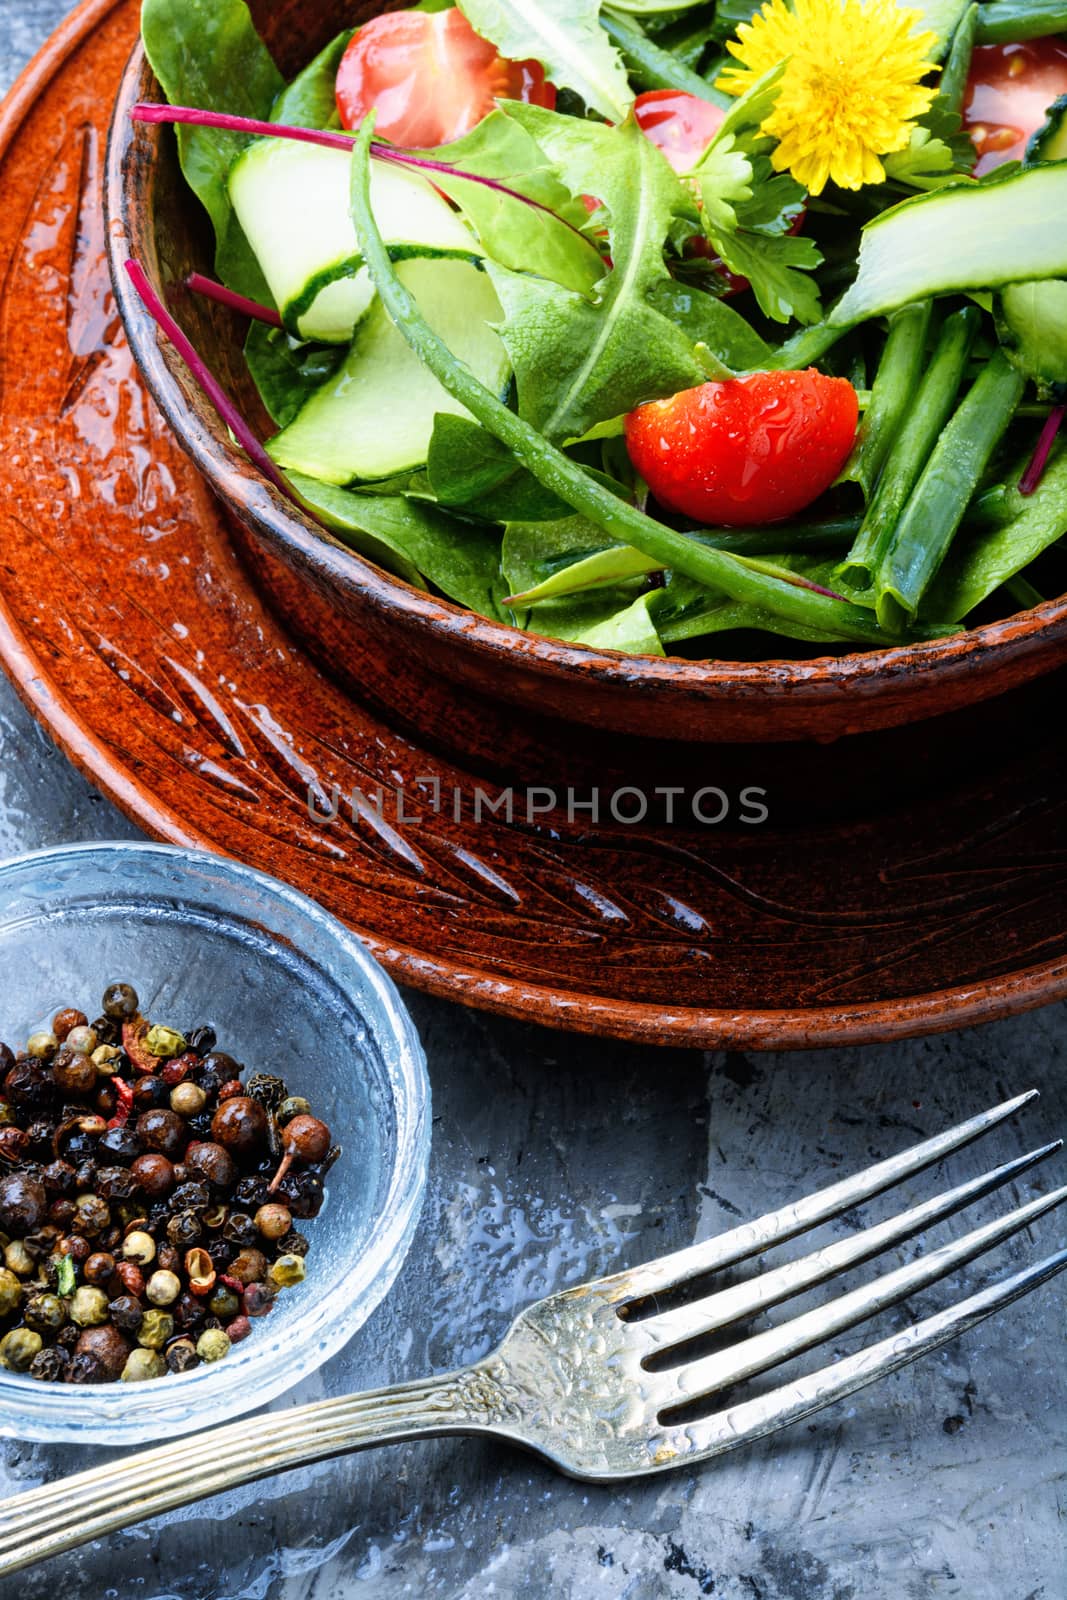 Healthy vegetable salad of fresh tomato, cucumber, herb and lettuce